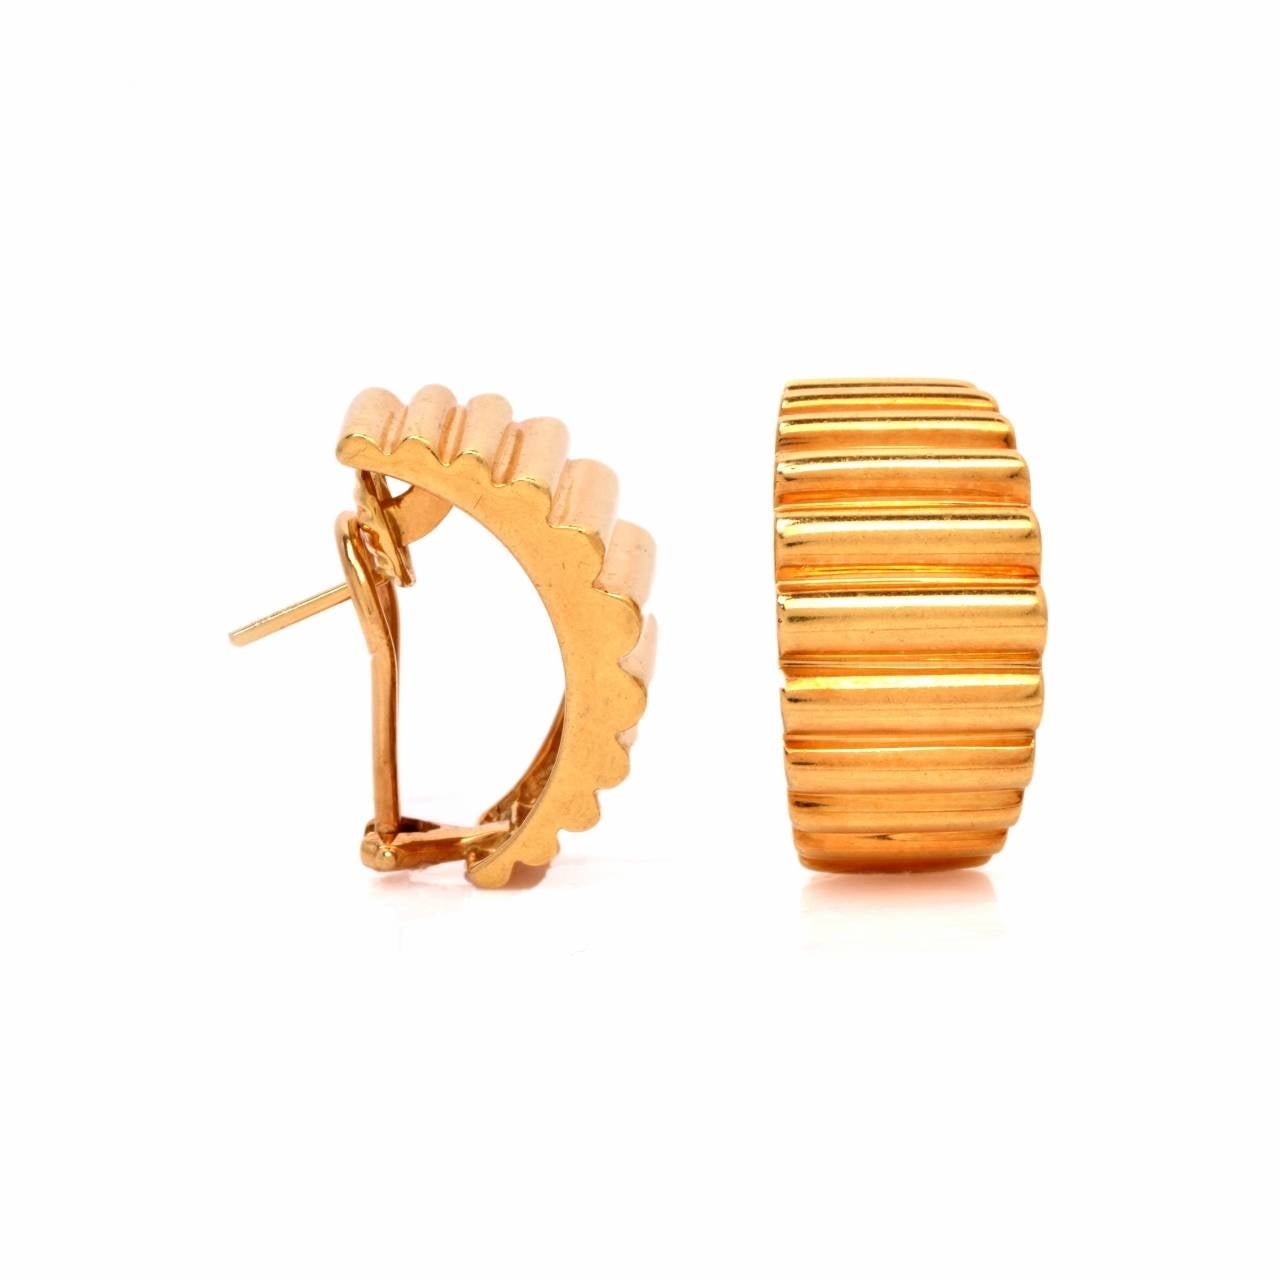 These exquisite estate designer earrings 'Tiffany & Co.' are crafted in solid 18K yellow gold. Showcasing a classic huggie design with fine engraved lines to accentuate the overall design. These earrings come with security french clip backs and are